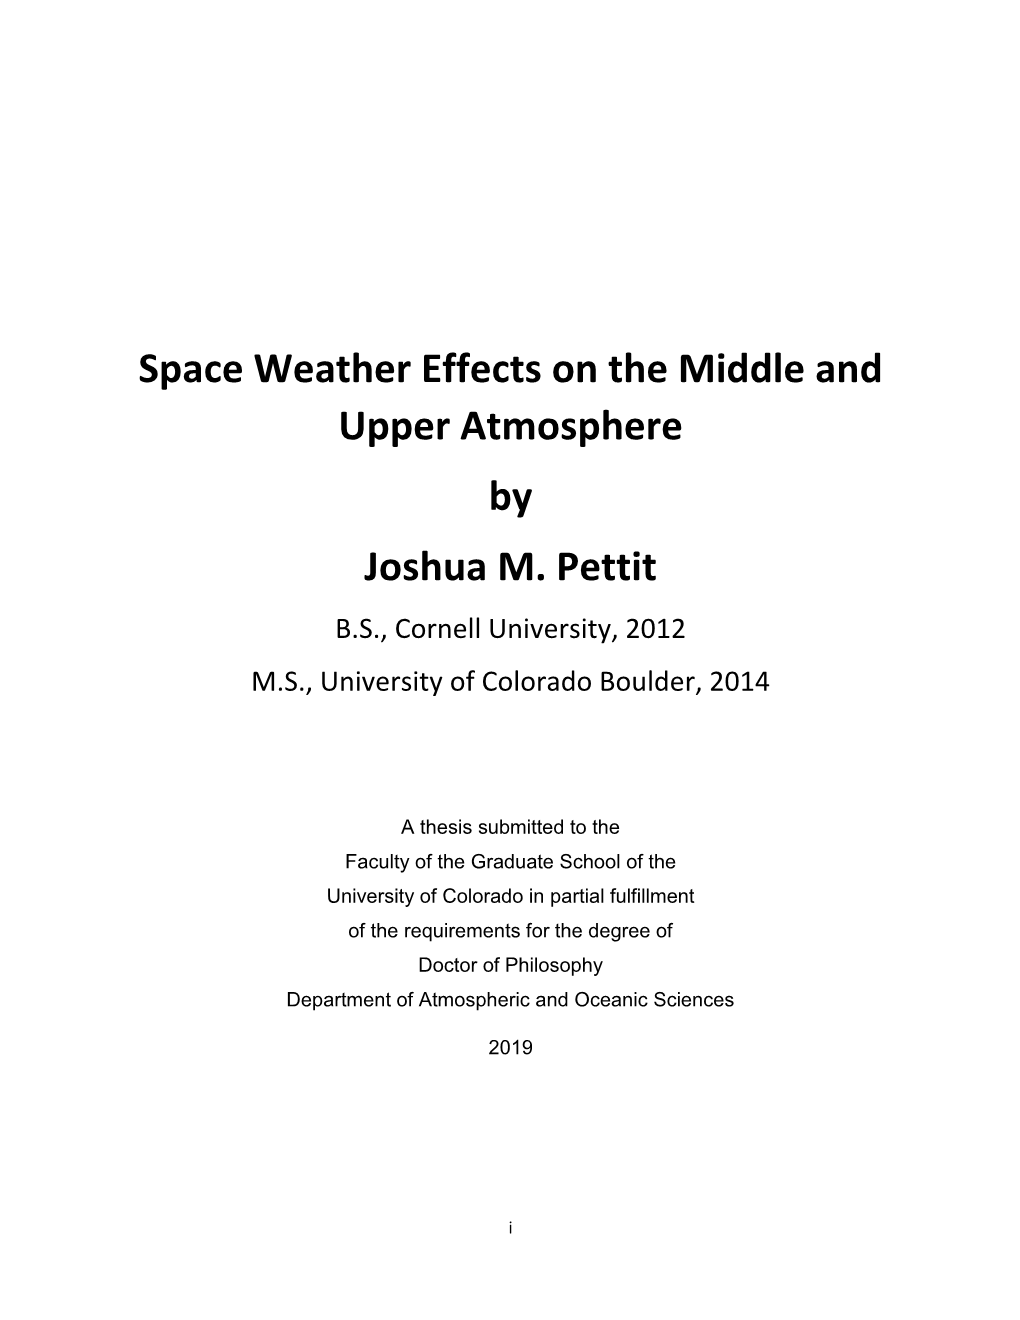 Space Weather Effects on the Middle and Upper Atmosphere by Joshua M